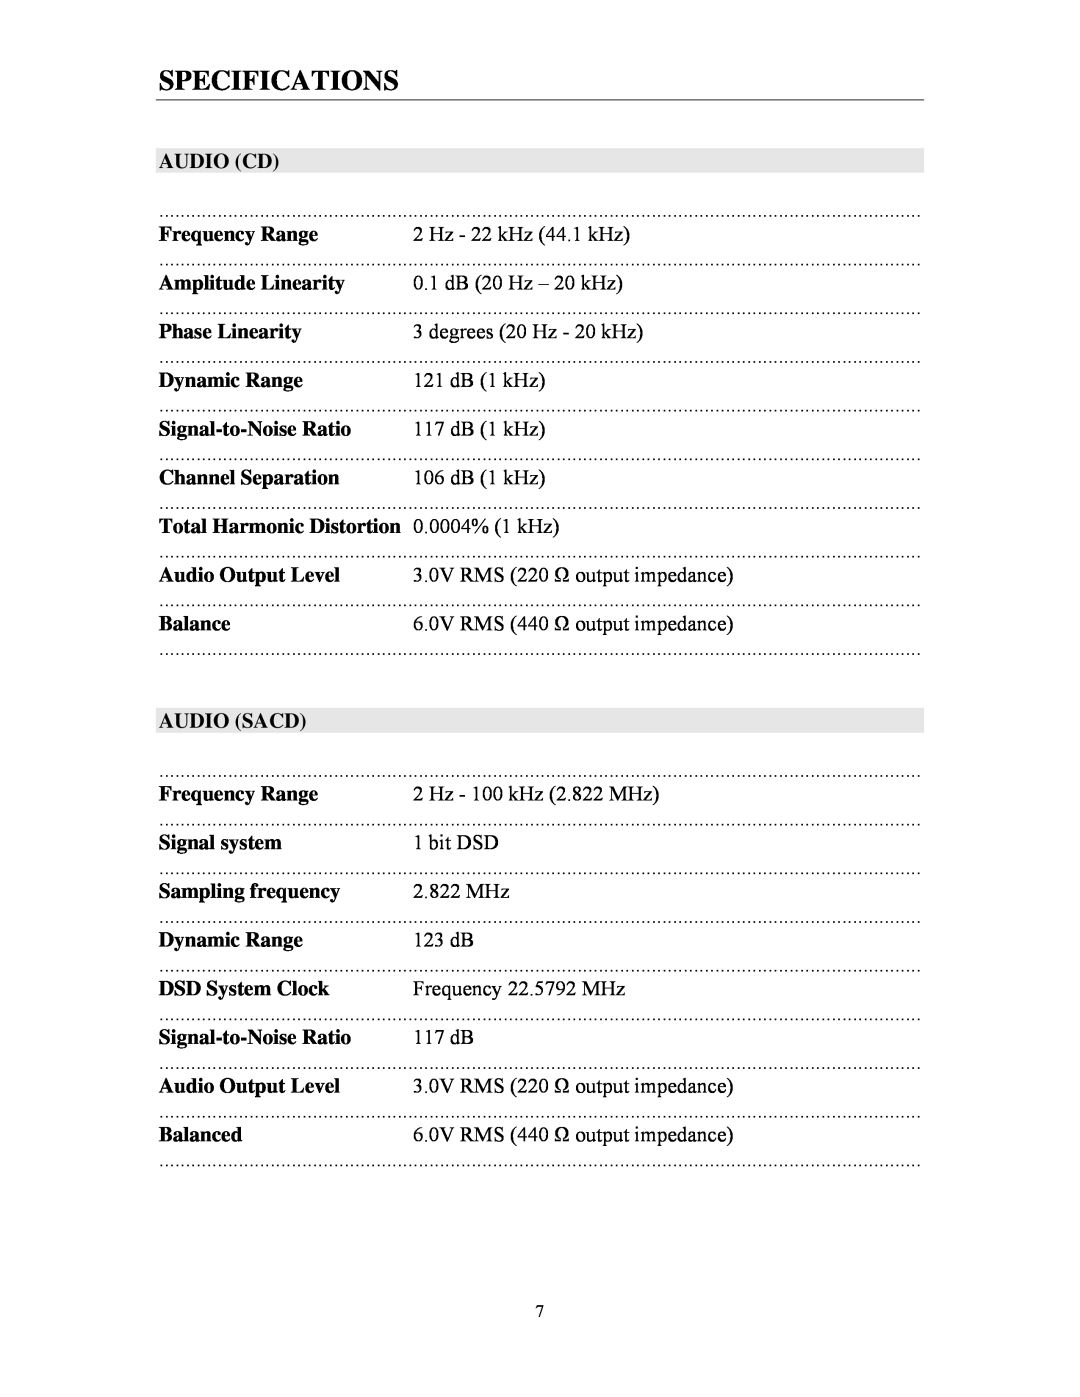 Cary Audio Design CD 303T SACD specifications Specifications, Audio Cd 